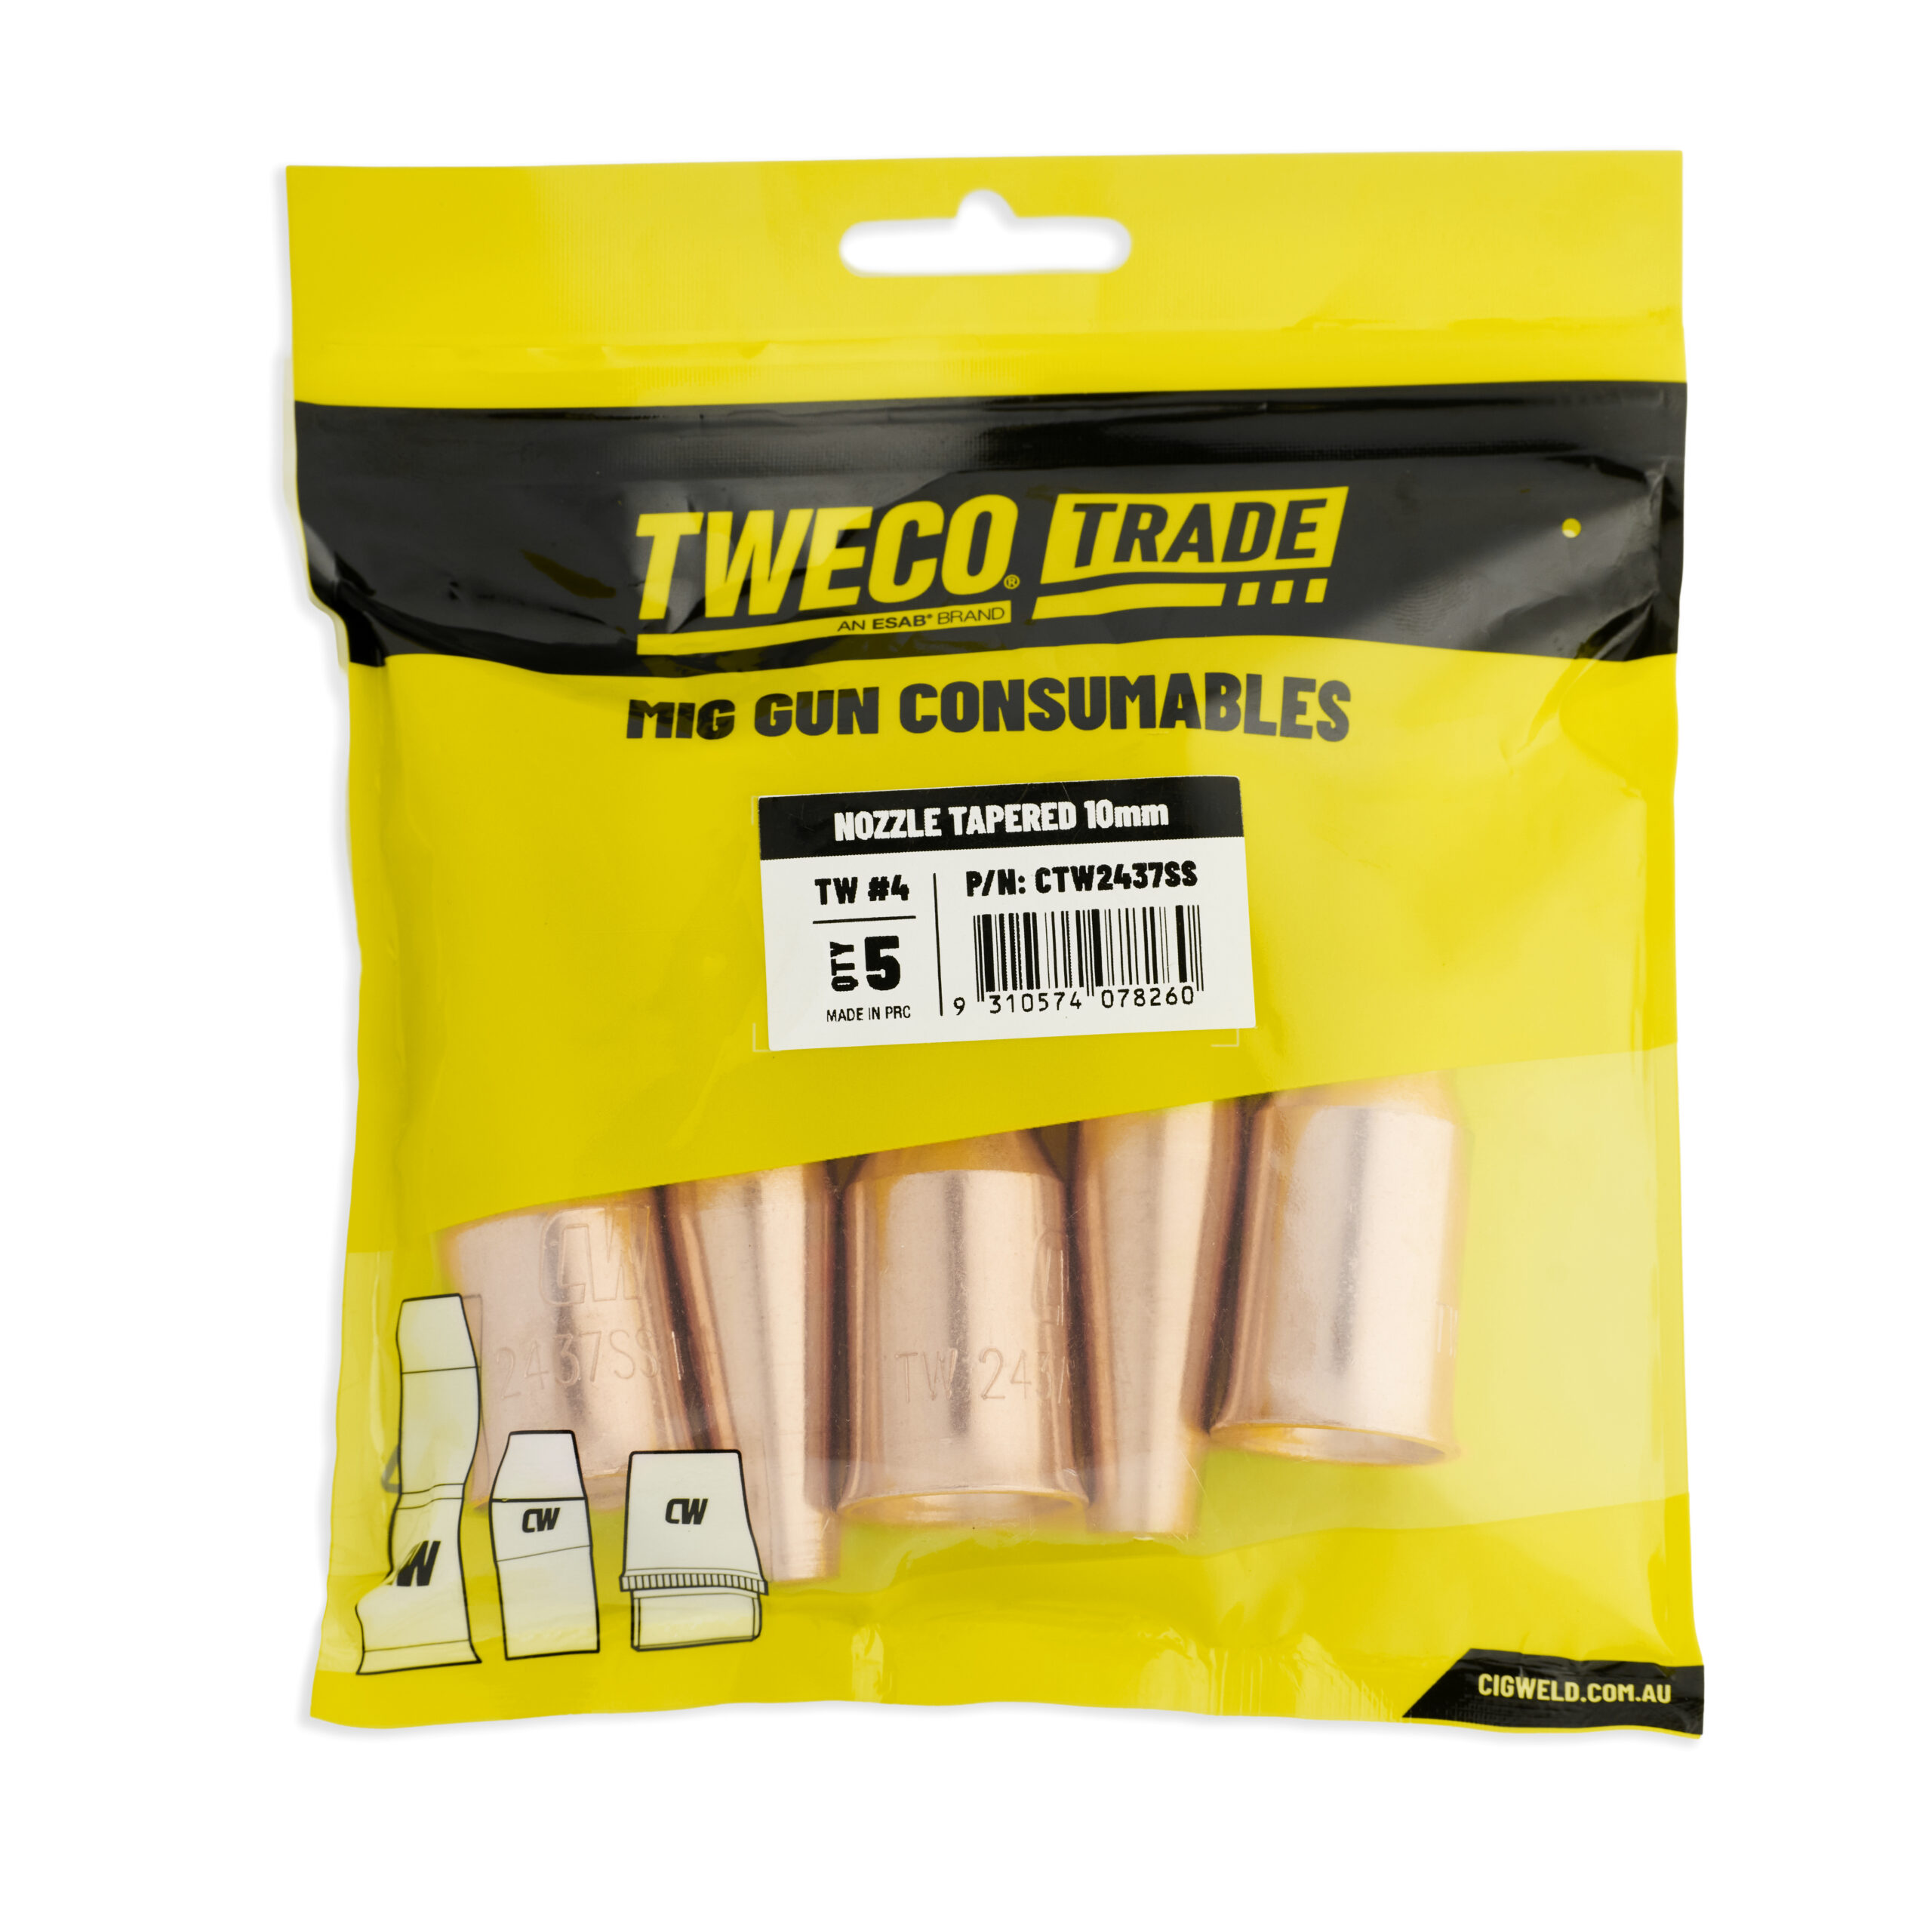 Tweco Trade 4 Tapered Nozzle 10mm 5pk